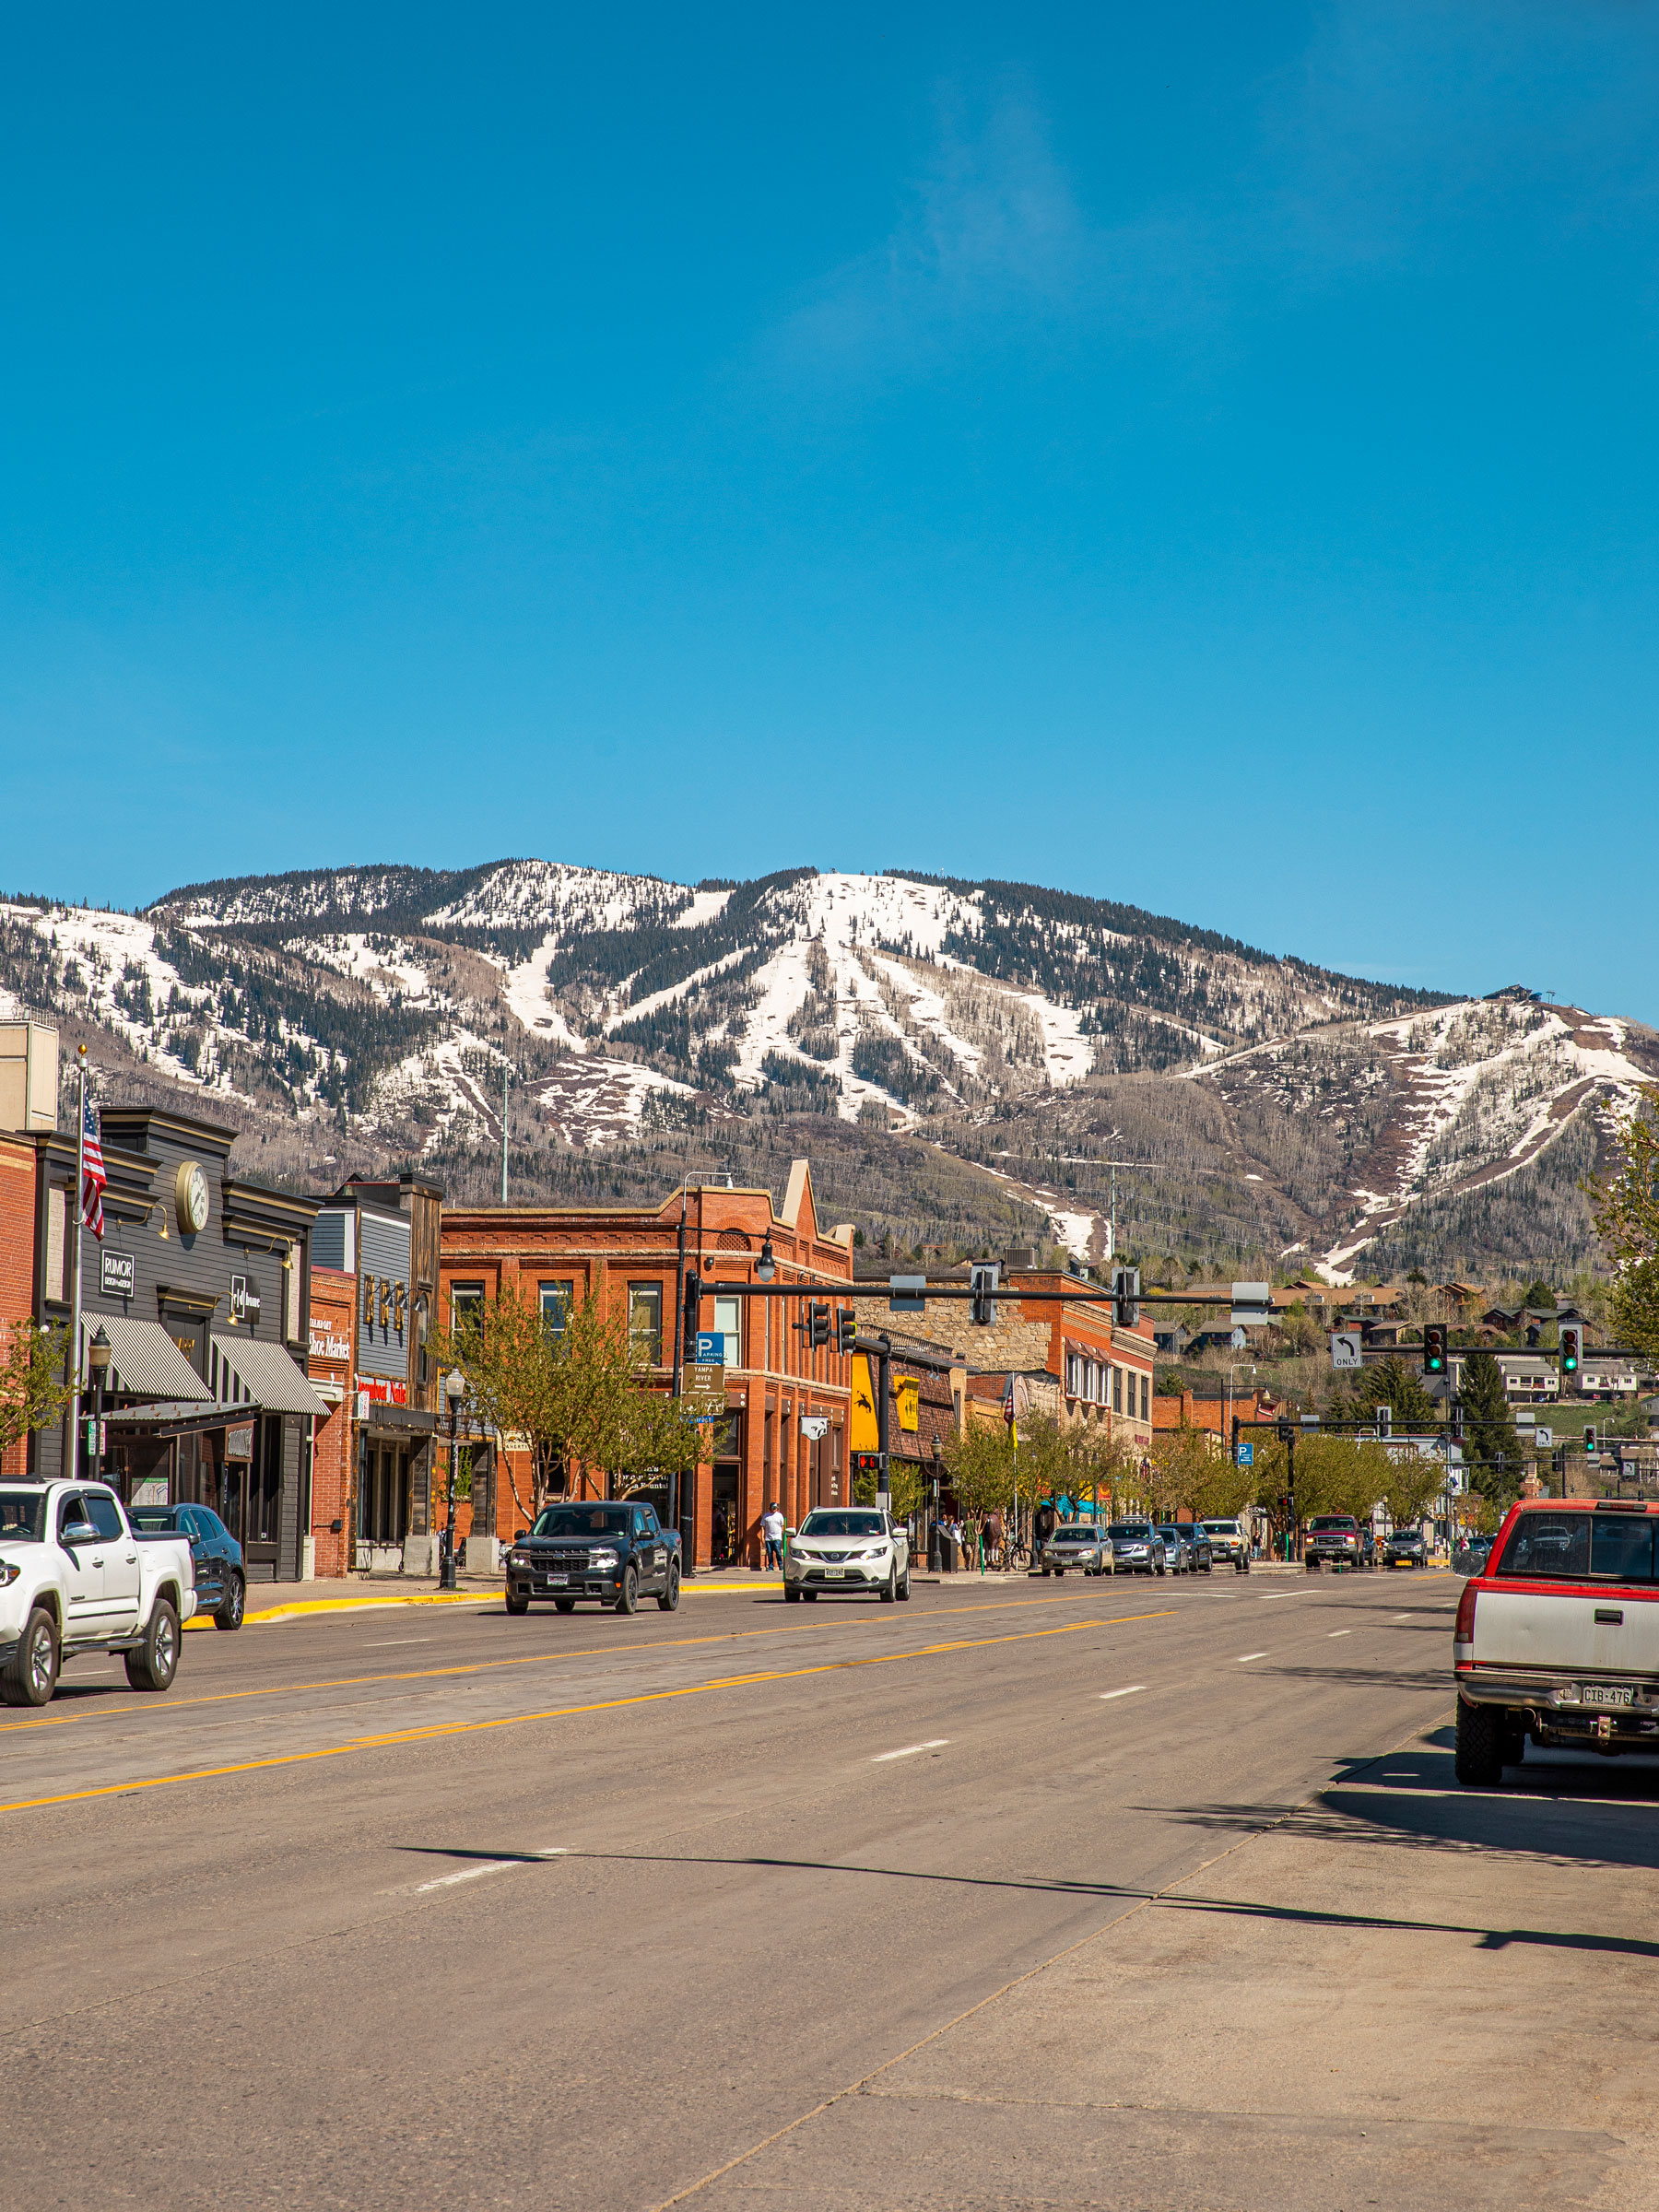 Traffic passes through the downtown area of Steamboat Springs, Colorado on May 16, 2022. (David Williams for TIME)